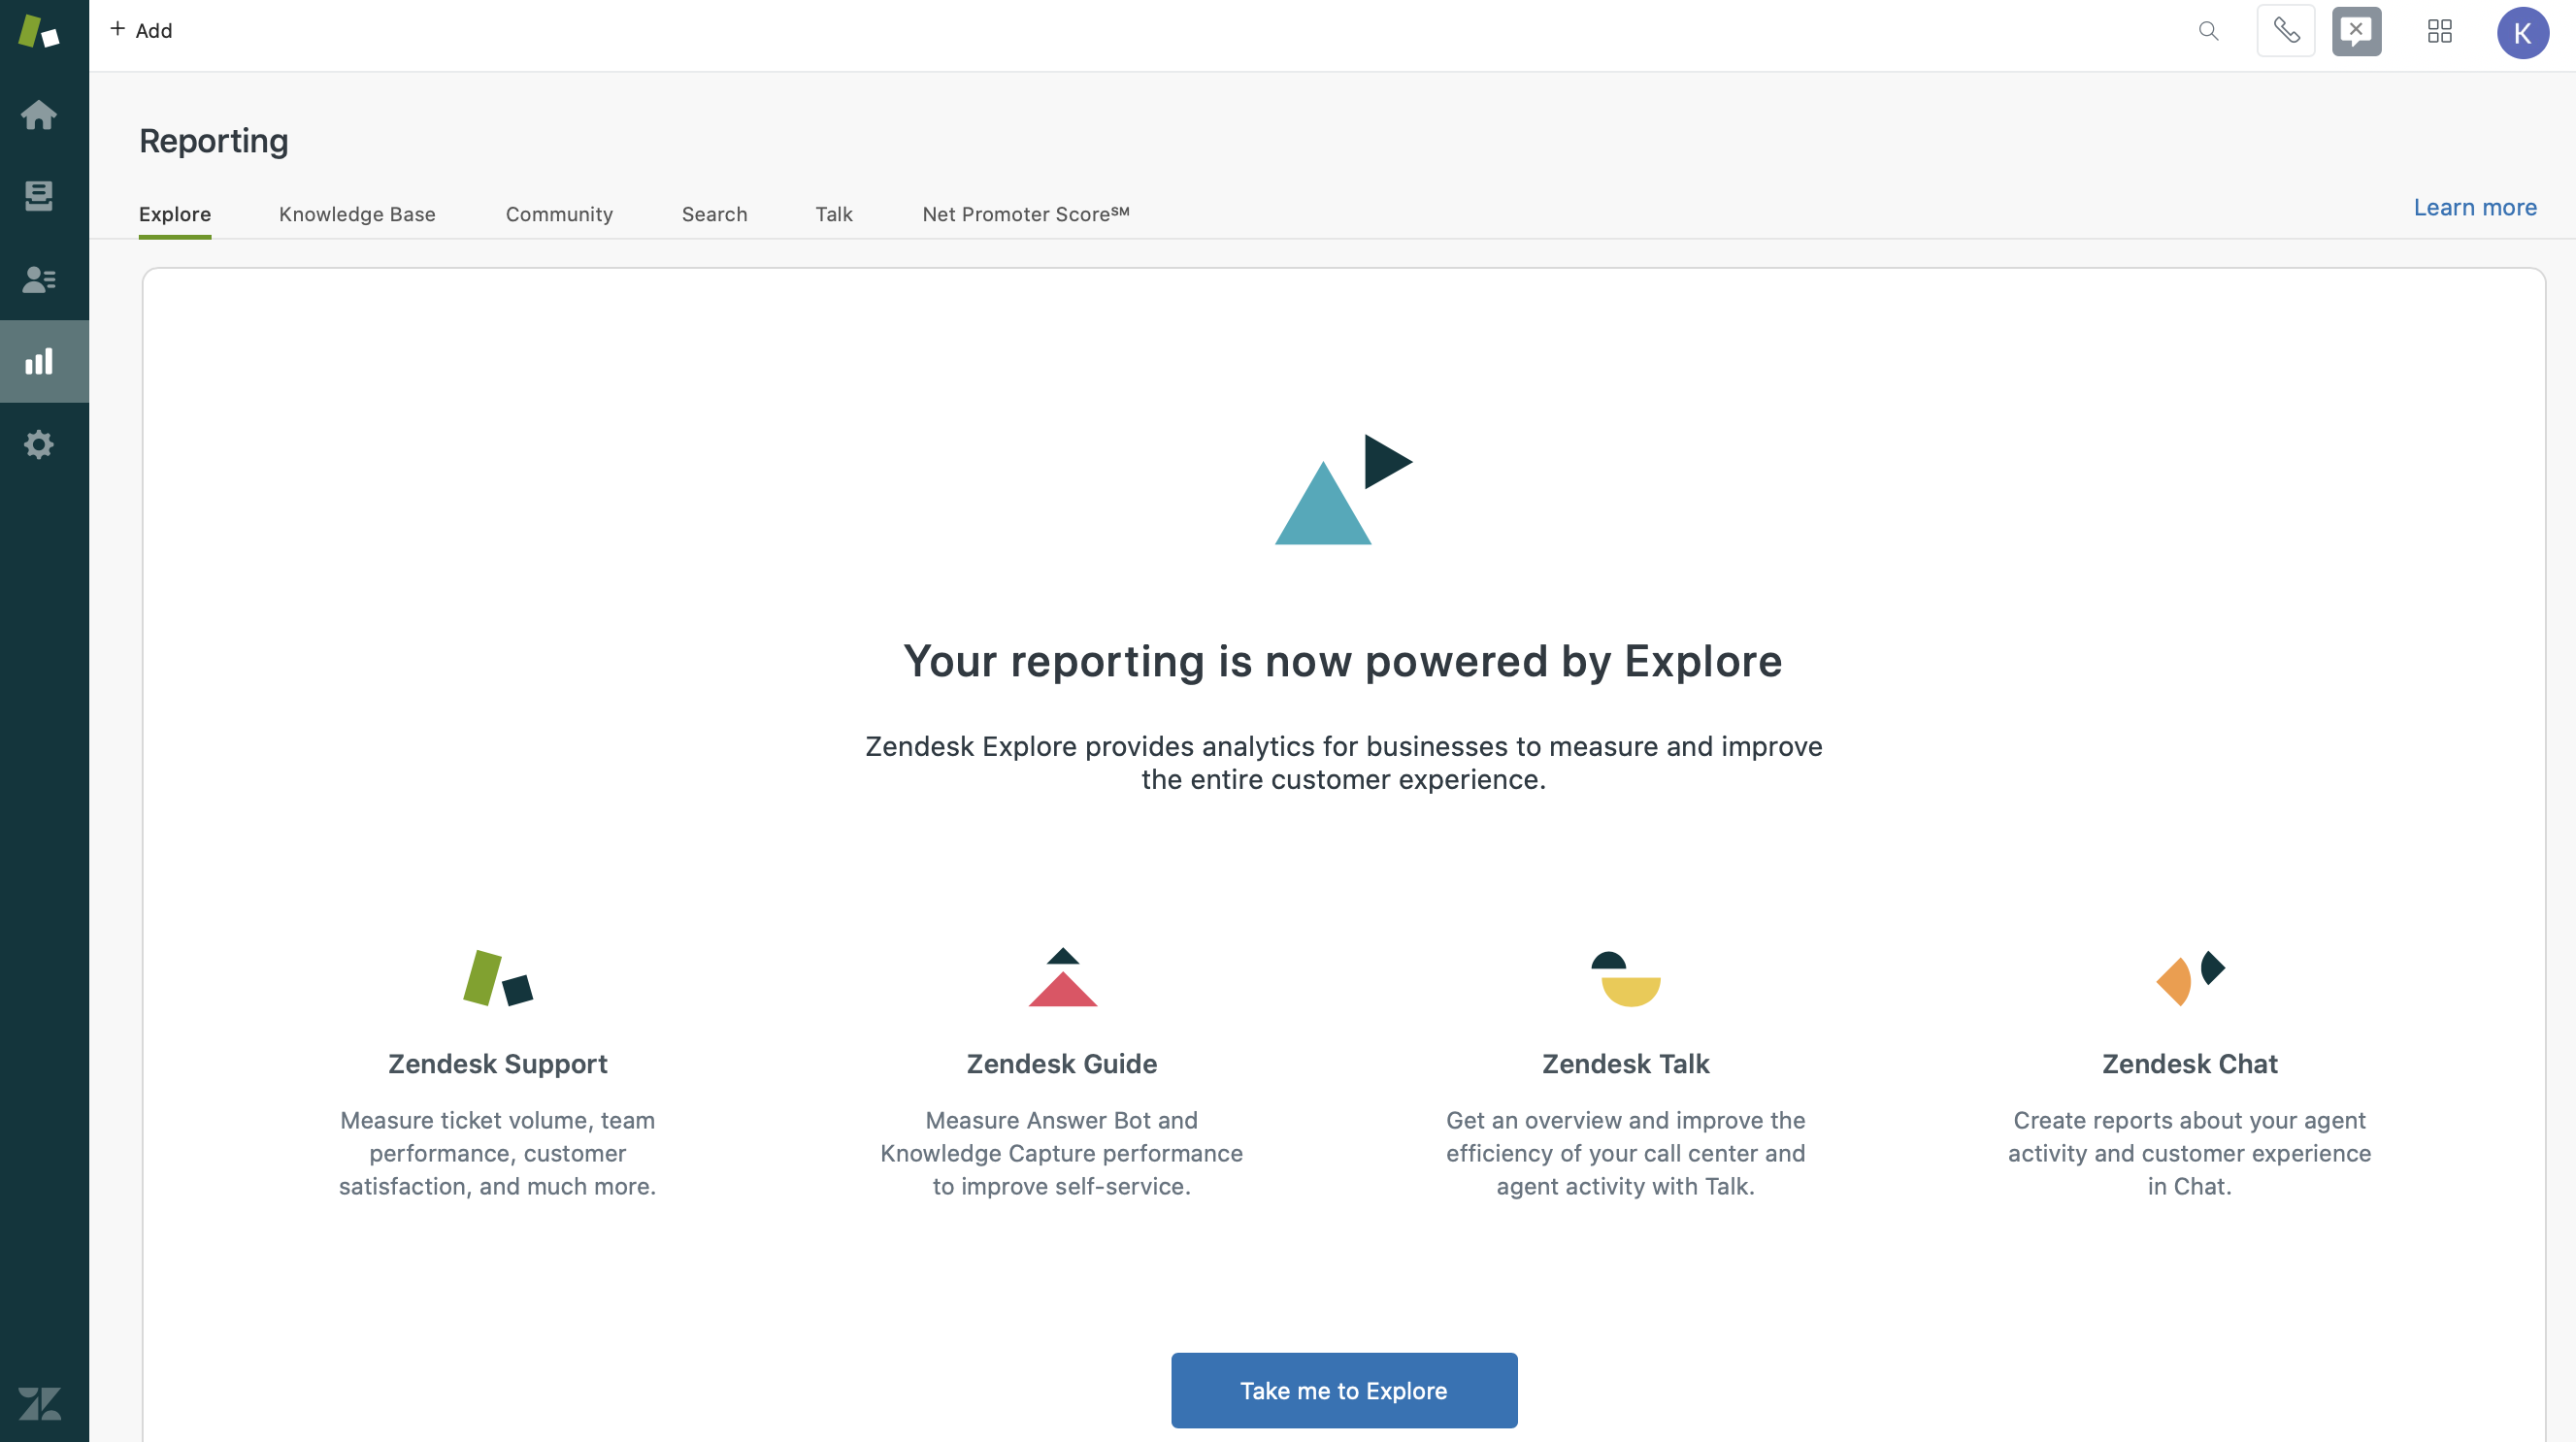 Your_reporting_is_now_po Powered_by_Explore.png